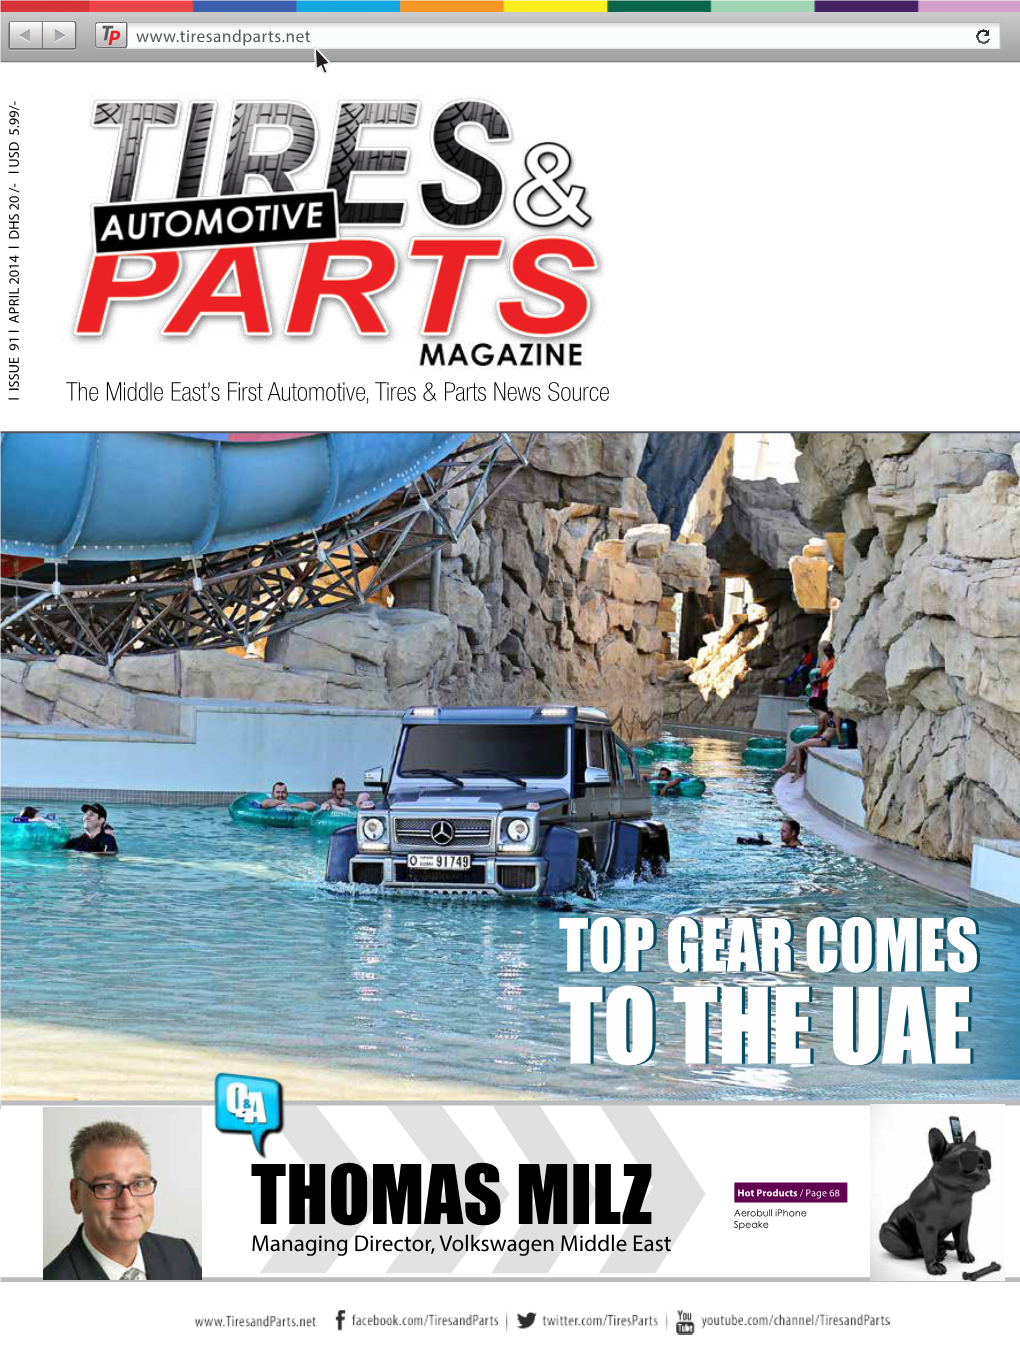 APRIL 2014 L DHS 20 /- L USD 5.99/- the Middleeast’S First Automotive, Tires &Parts Newssource T P Speake Aerobull Iphone Hot Products/Page68